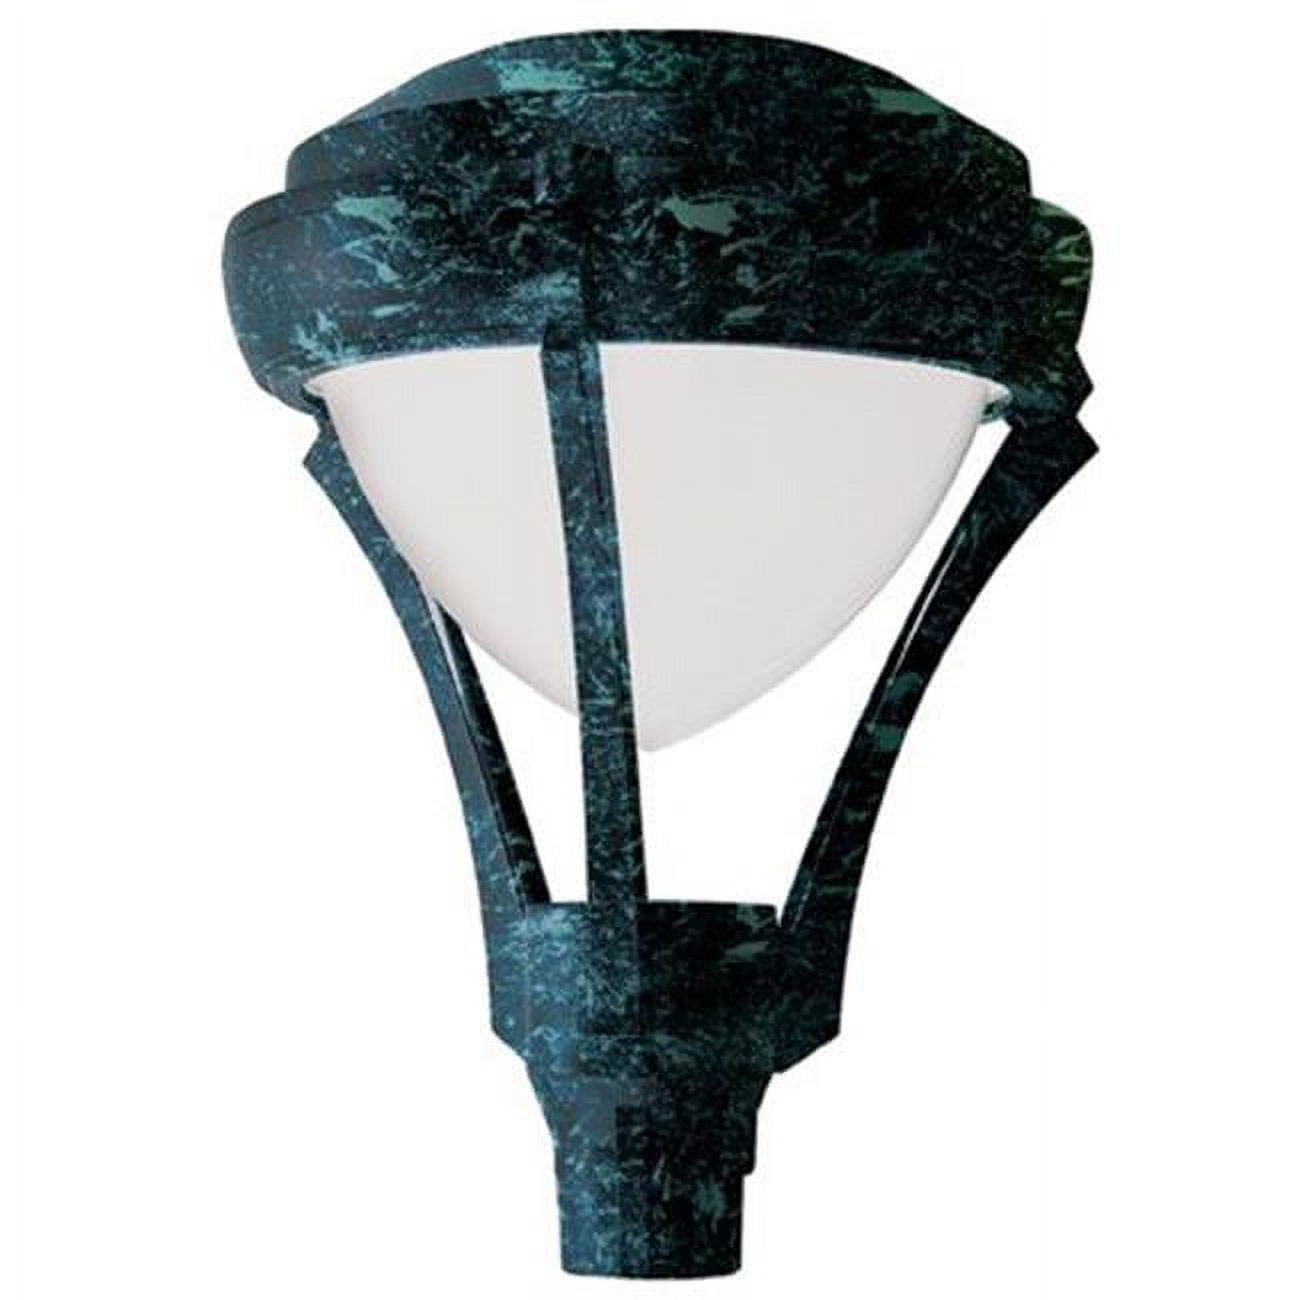 Picture of Dabmar Lighting GM591-VG 50W 120V Powder Coated Cast Aluminum Post Top Light Fixture with High Pressure Sodium Lamp, Verde Green - 27.95 x 21.65 x 21.65 in.